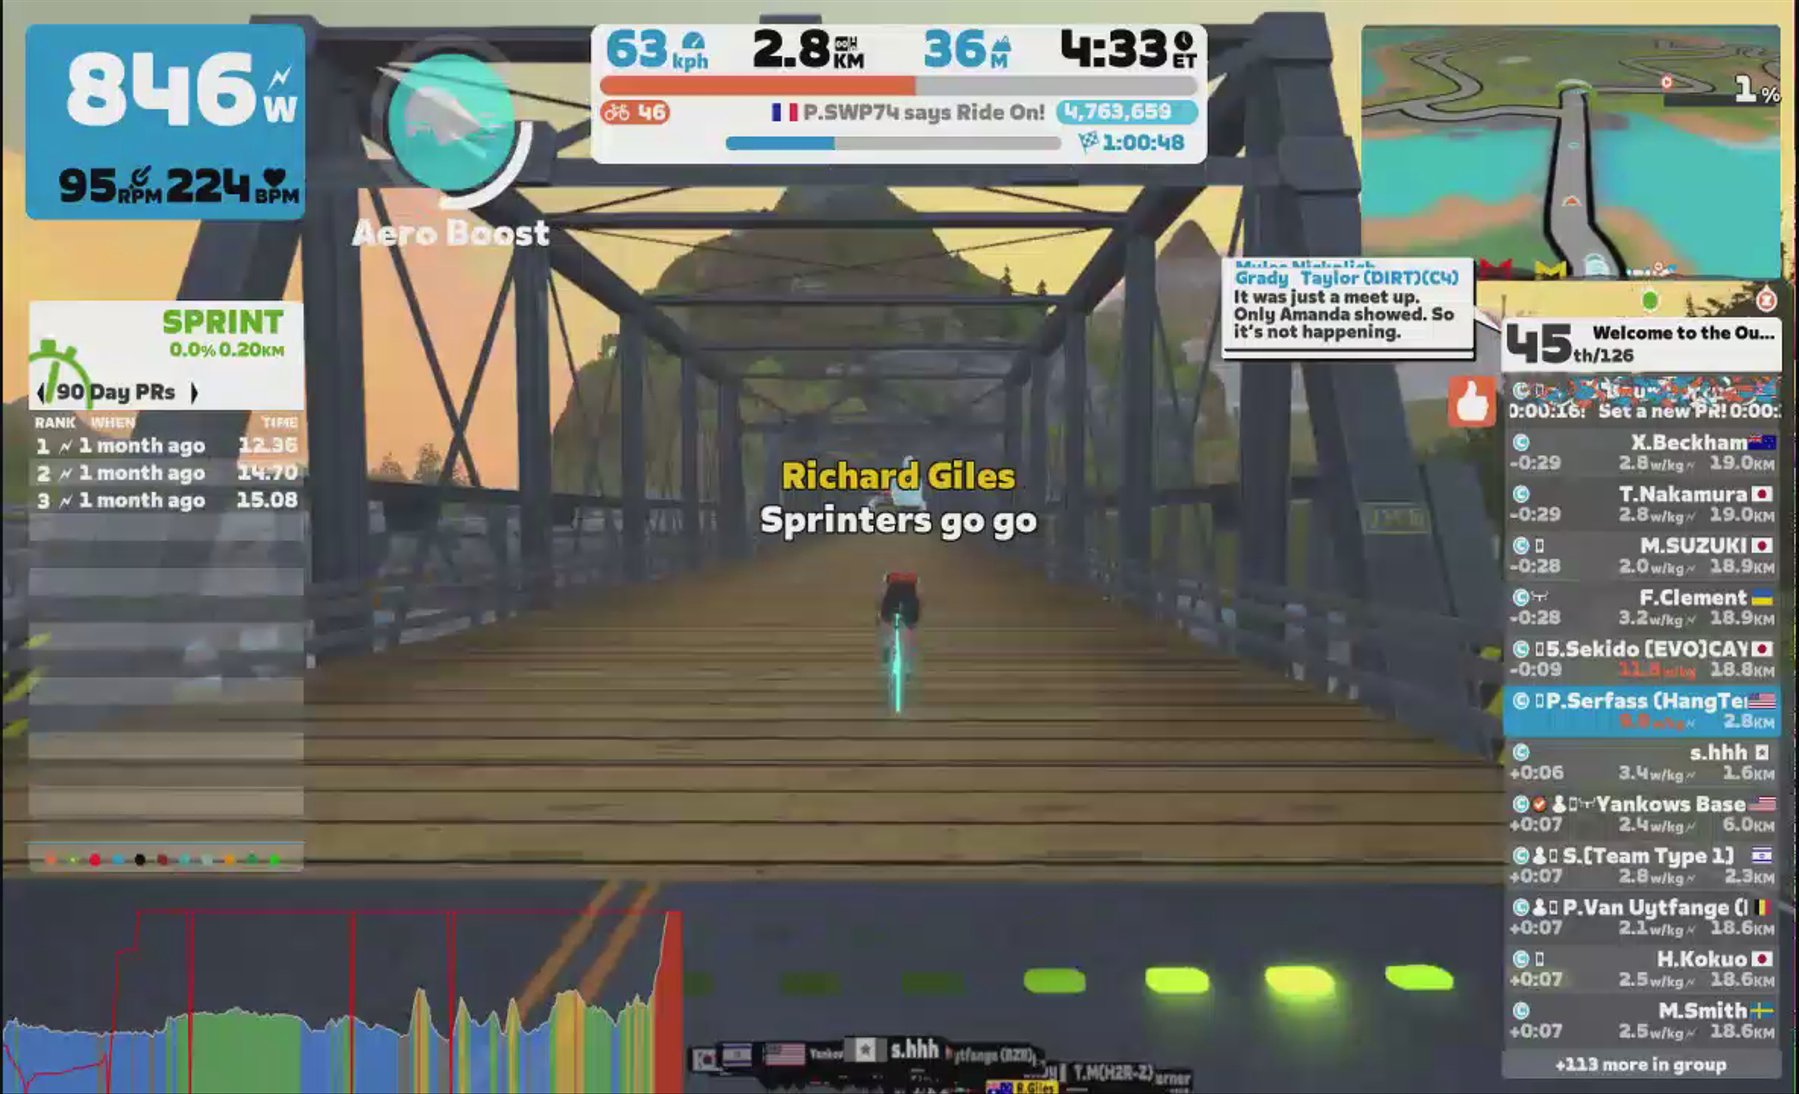 Zwift - Group Ride: Welcome to the Outback DIRT ride (C) on Triple Flat Loops in Watopia